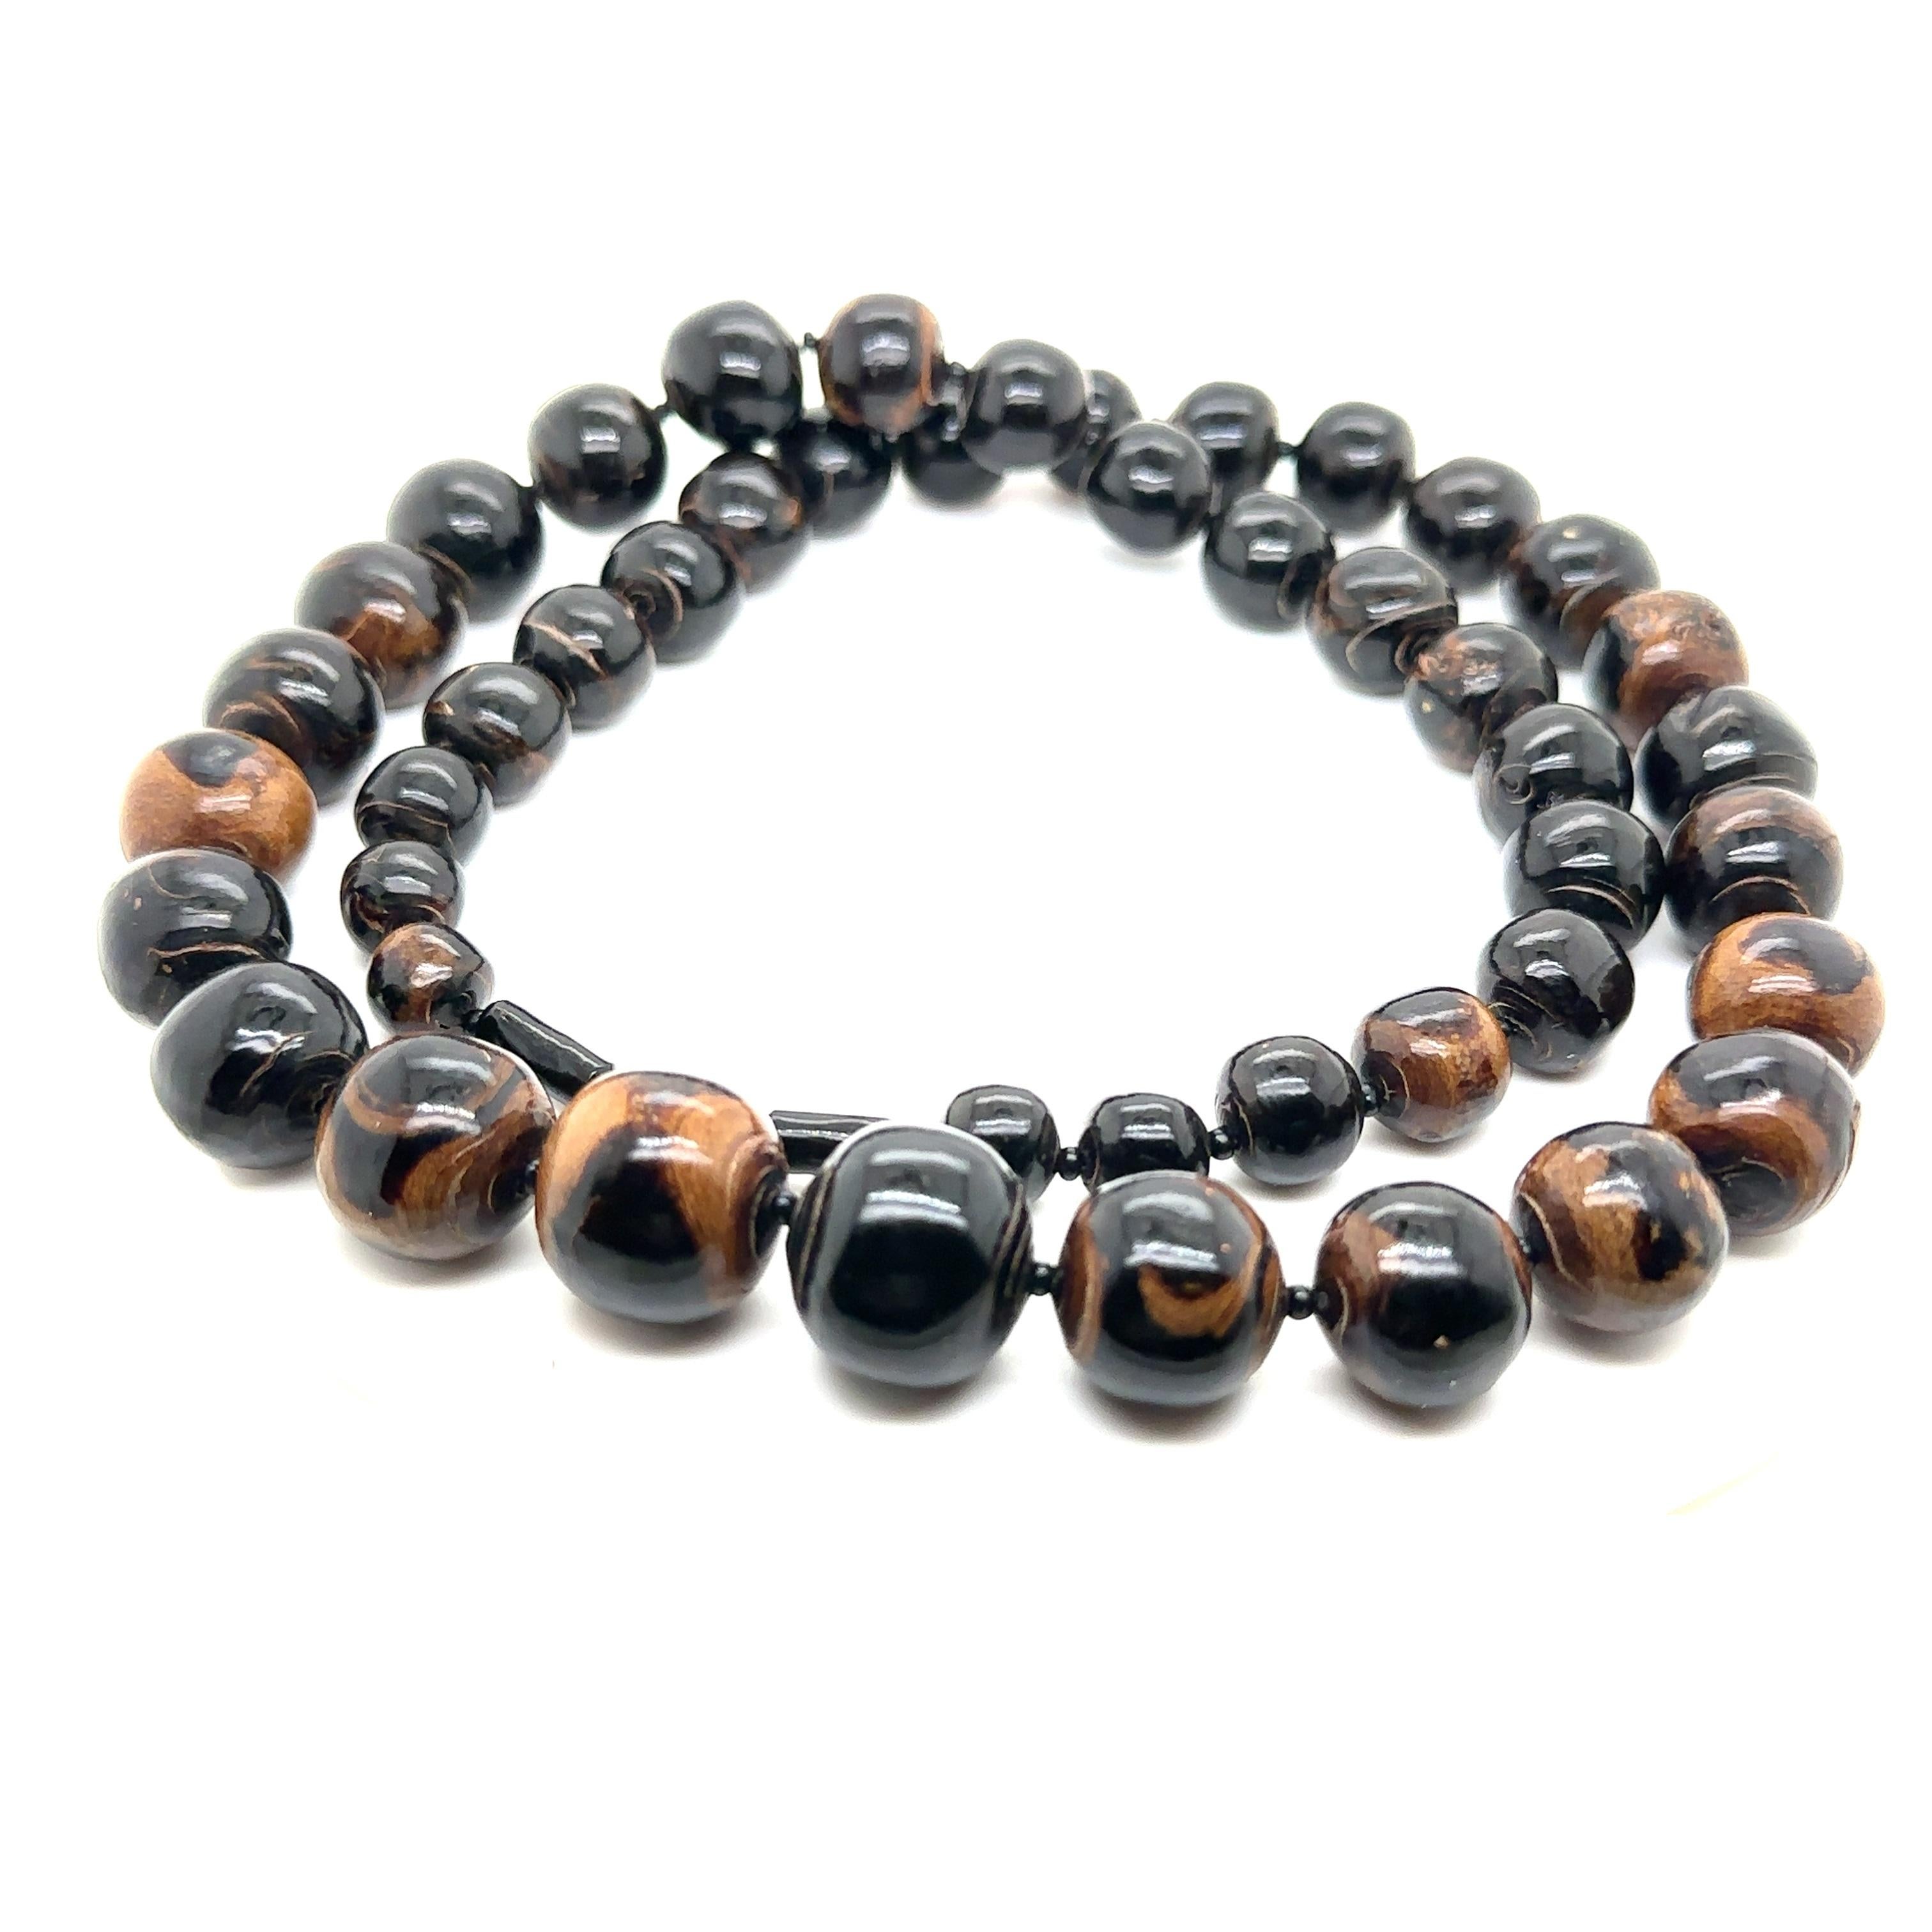 Fantastic and rare natural black coral graduated bead necklace. The length is 26 ½ inches and the beads range from 9MM to 16.55MM. The round beads which show a variegated vivid black and gold color are very beautiful and clean in texture. 

This